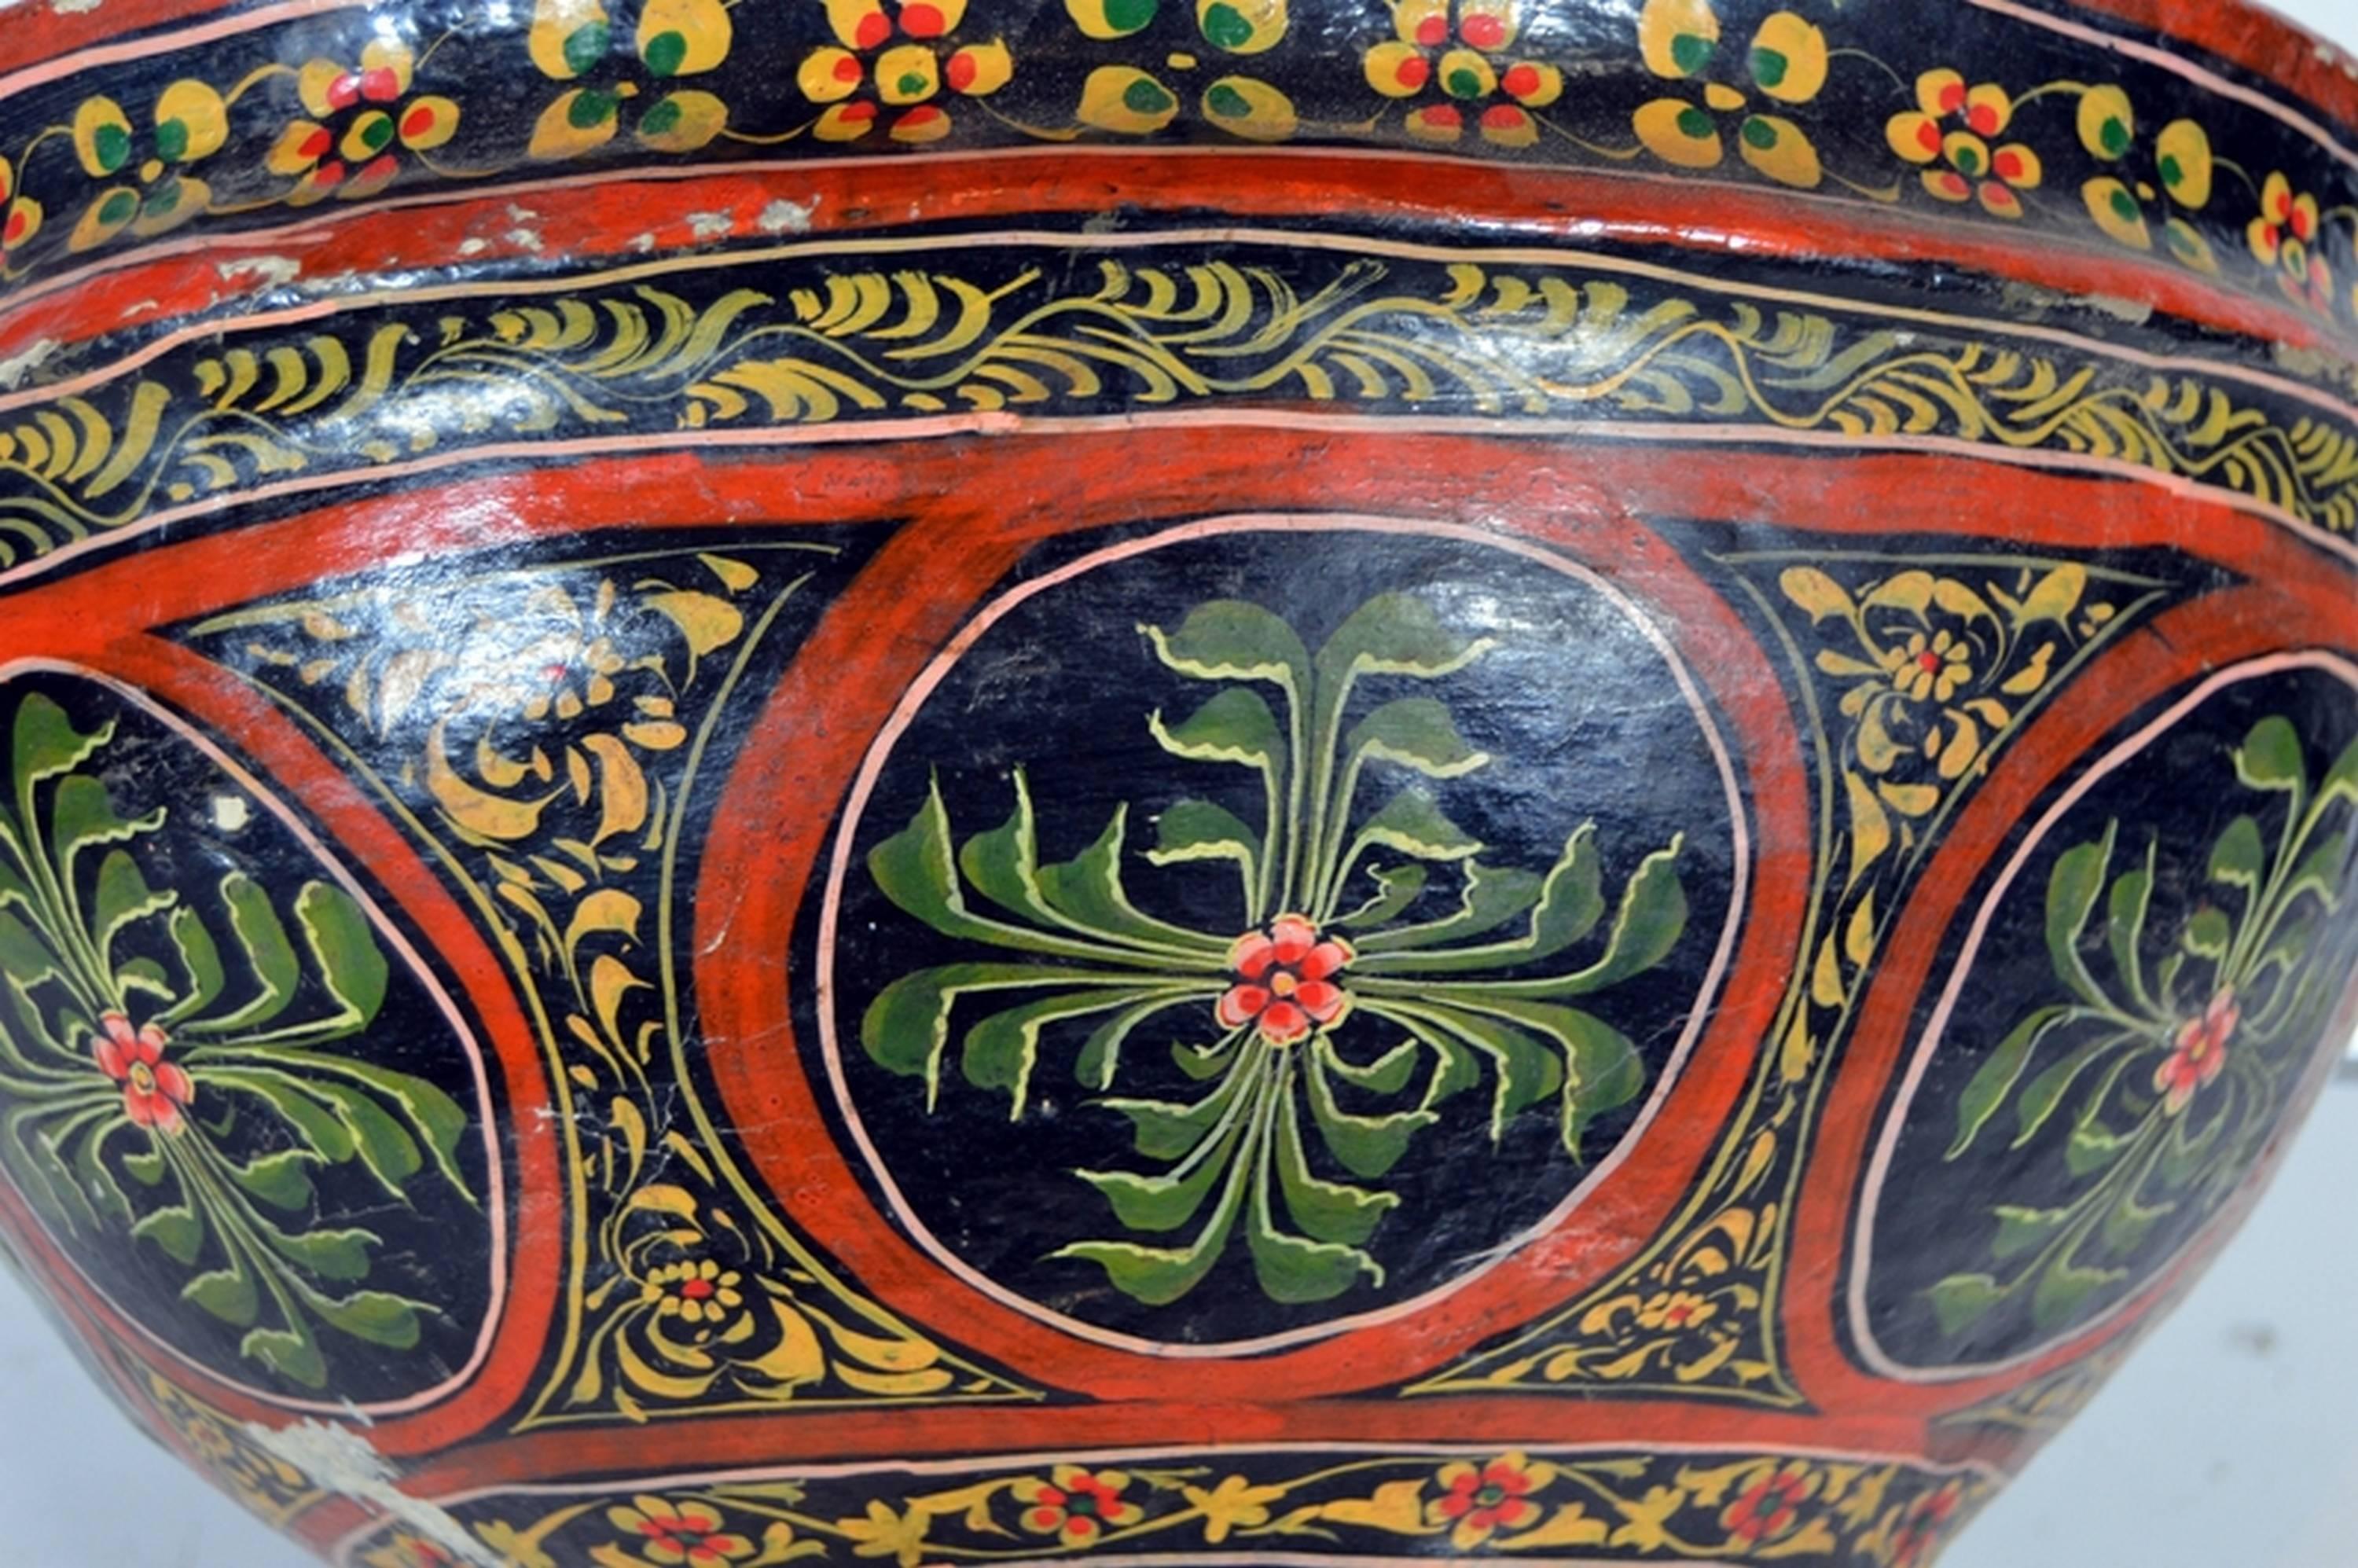 A large 19th century papier-mâché. bowl hand-painted with black and red flower patterns from India. The bowl features a black background with a flower frieze on the top and bottom. The belly showcases a frieze of large medallions with flowers and